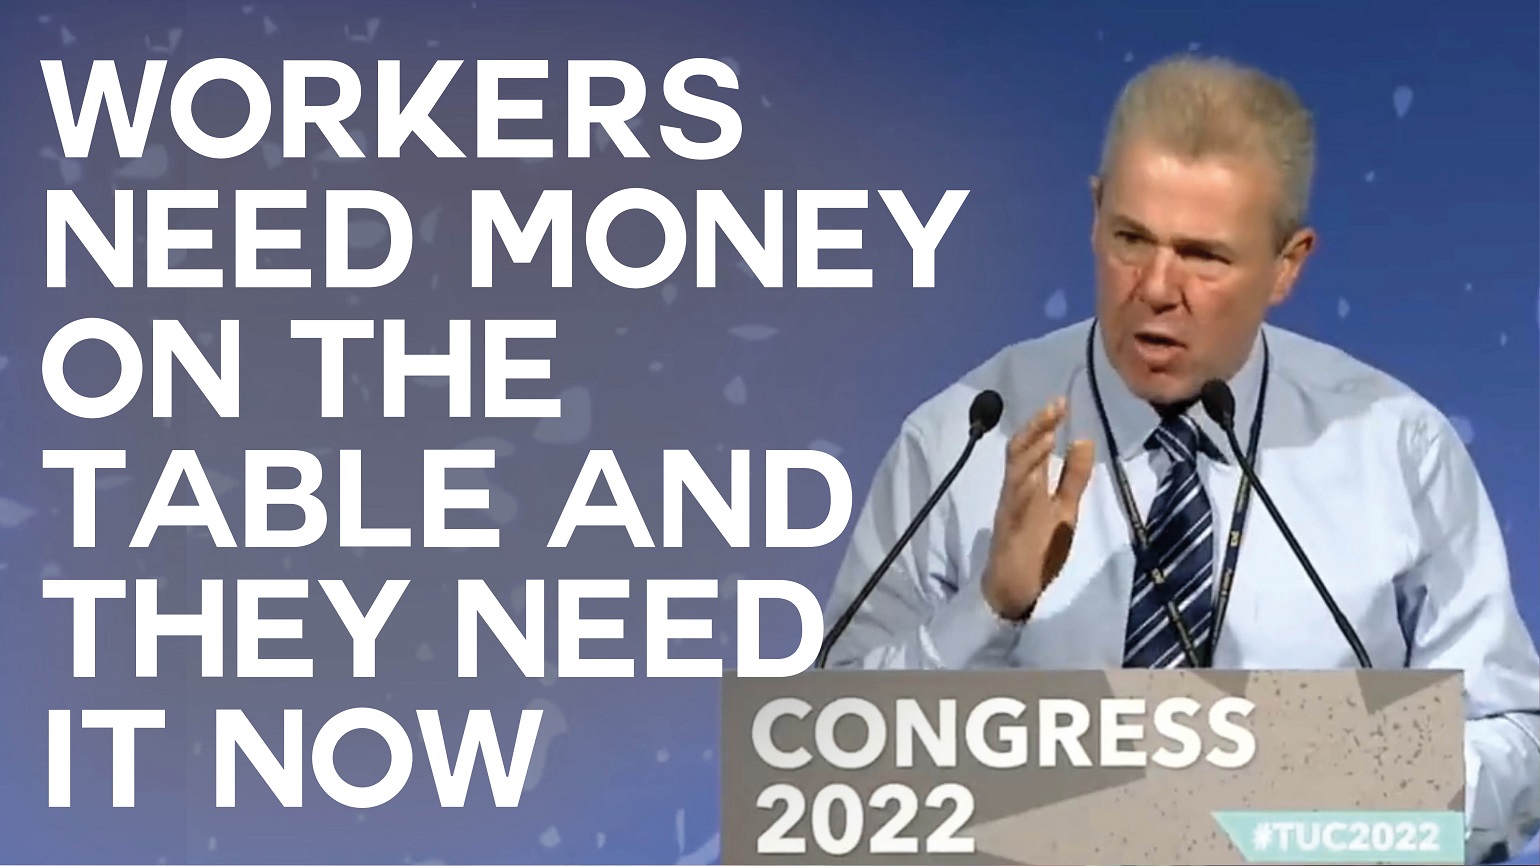 A photo of Mark Serwotka with text overlaid reading "Workers need money on the table and they need it now"